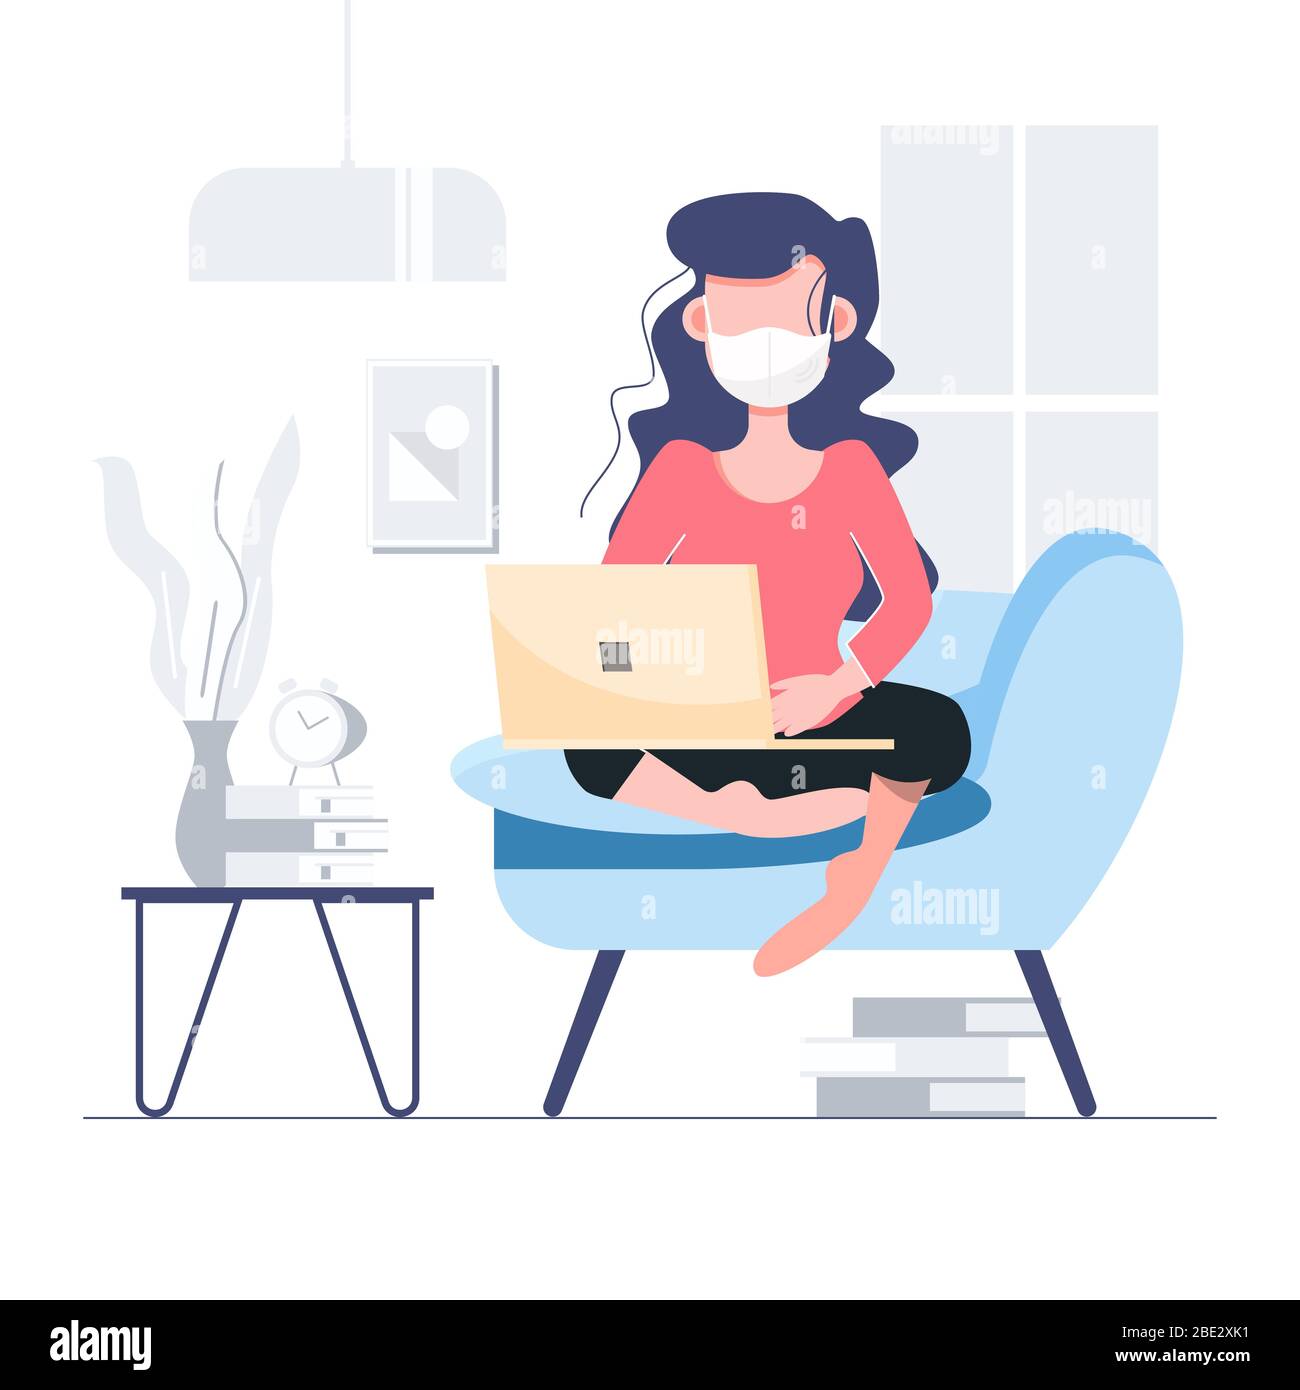 Work from home stay at home quarantine social distancing concept. Lockdown Covid-19 coronavirus outbreak. Digital transformation. Flat character abstr Stock Vector